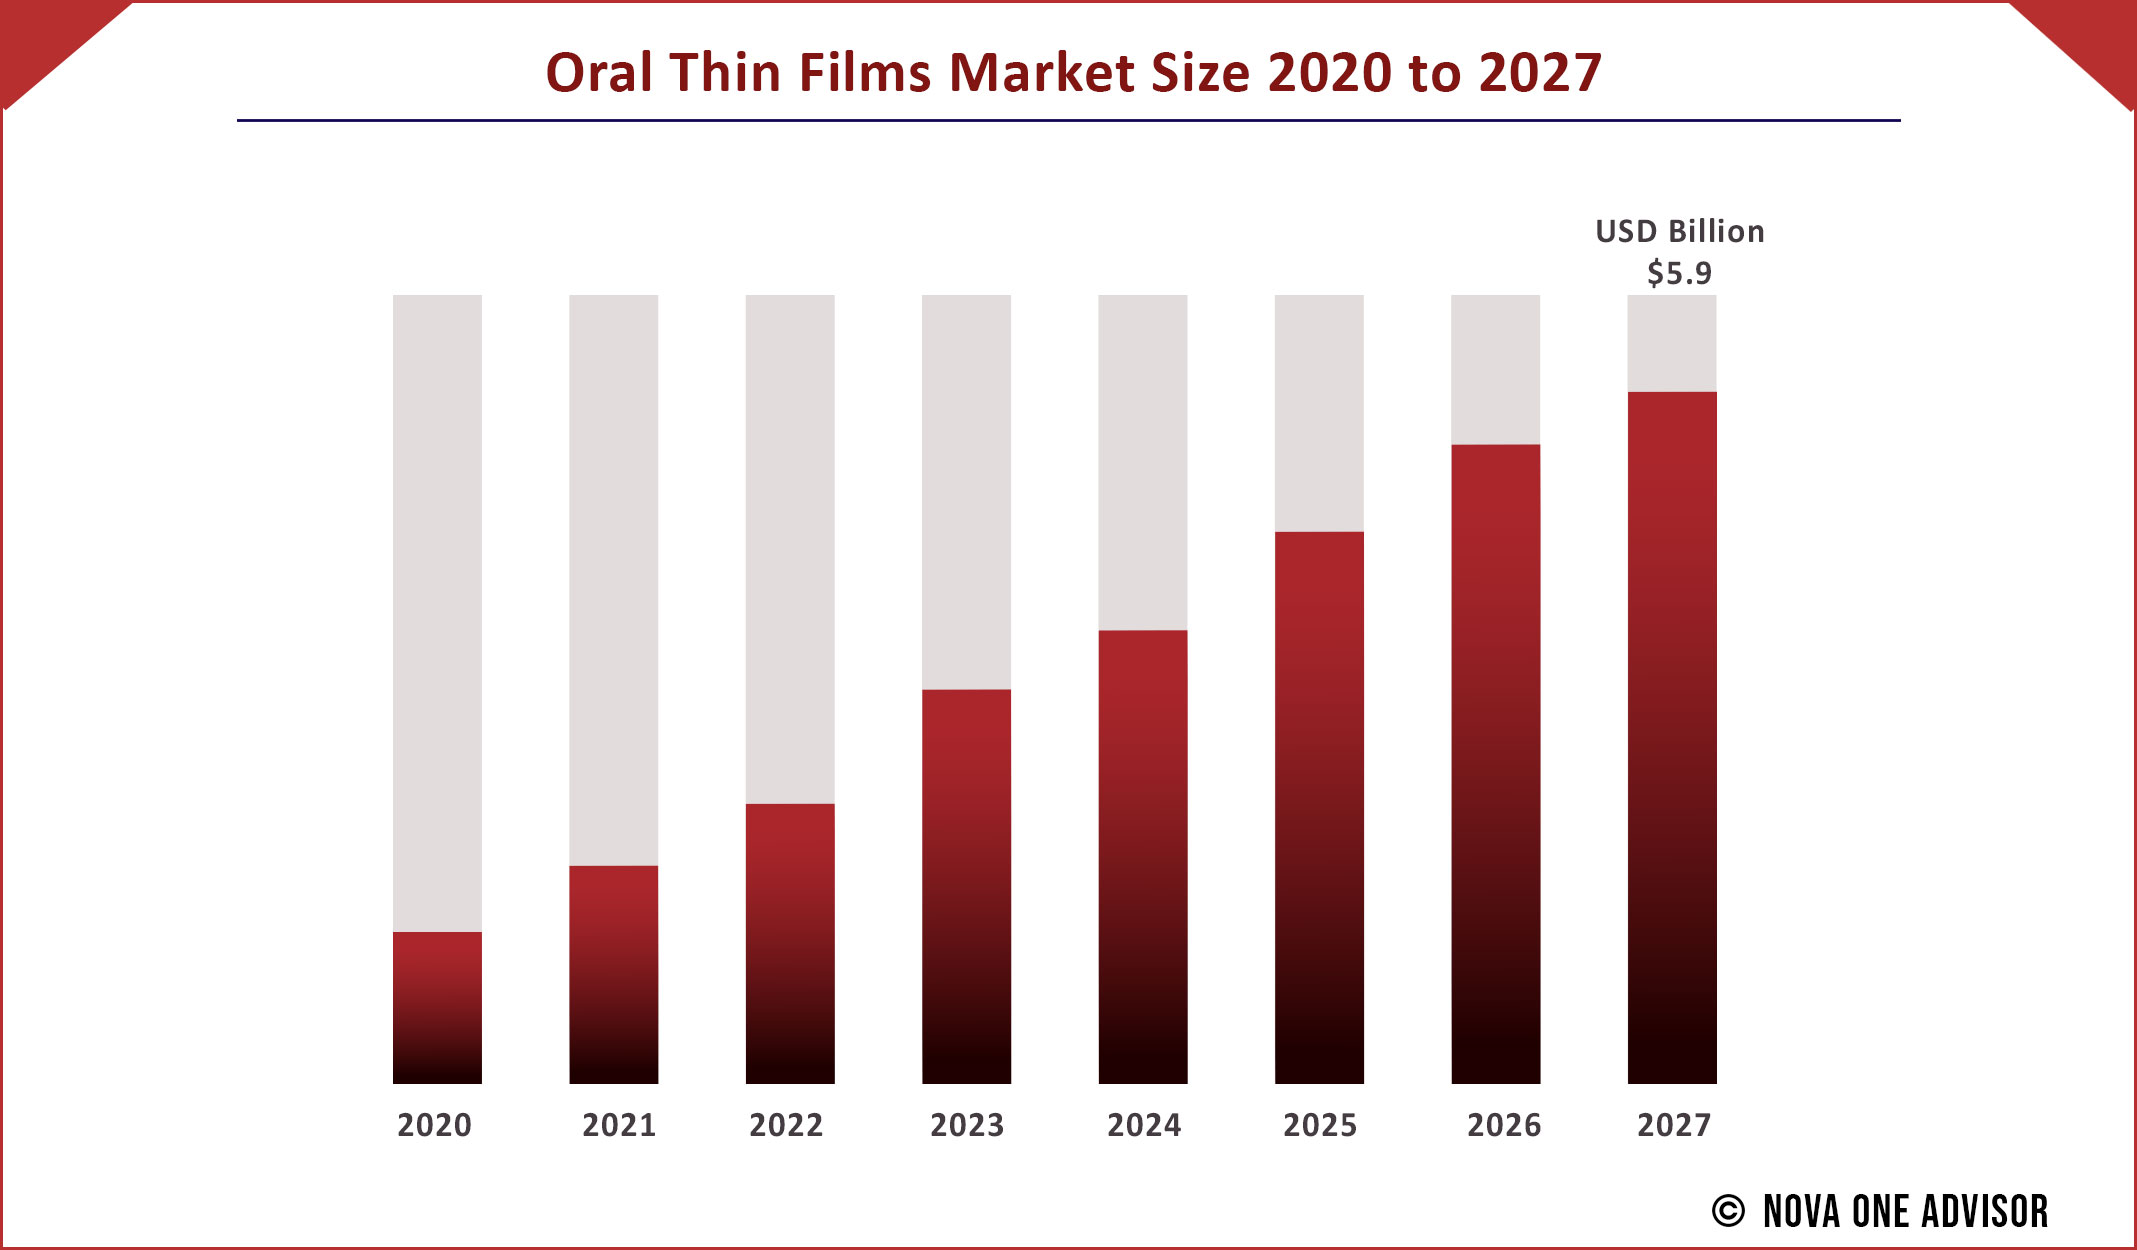 Oral Thin Films Market Size 2020 to 2027